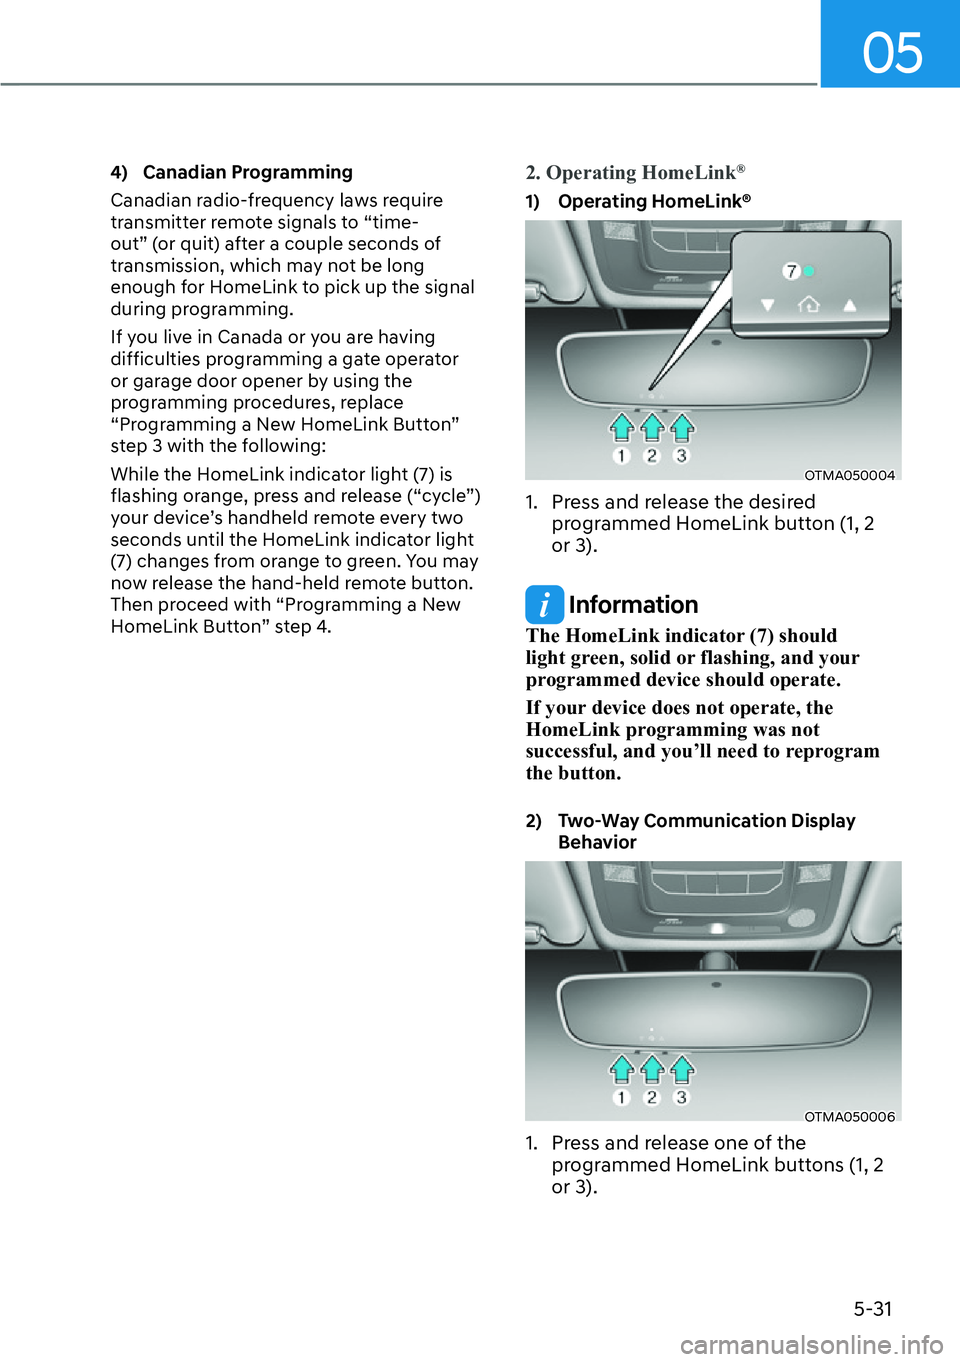 HYUNDAI SANTA FE HYBRID 2022  Owners Manual 05
5-31
4) Canadian Programming 
Canadian radio-frequency laws require  
transmitter remote signals to “time-
out” (or quit) after a couple seconds of 
transmission, which may not be long 
enough 